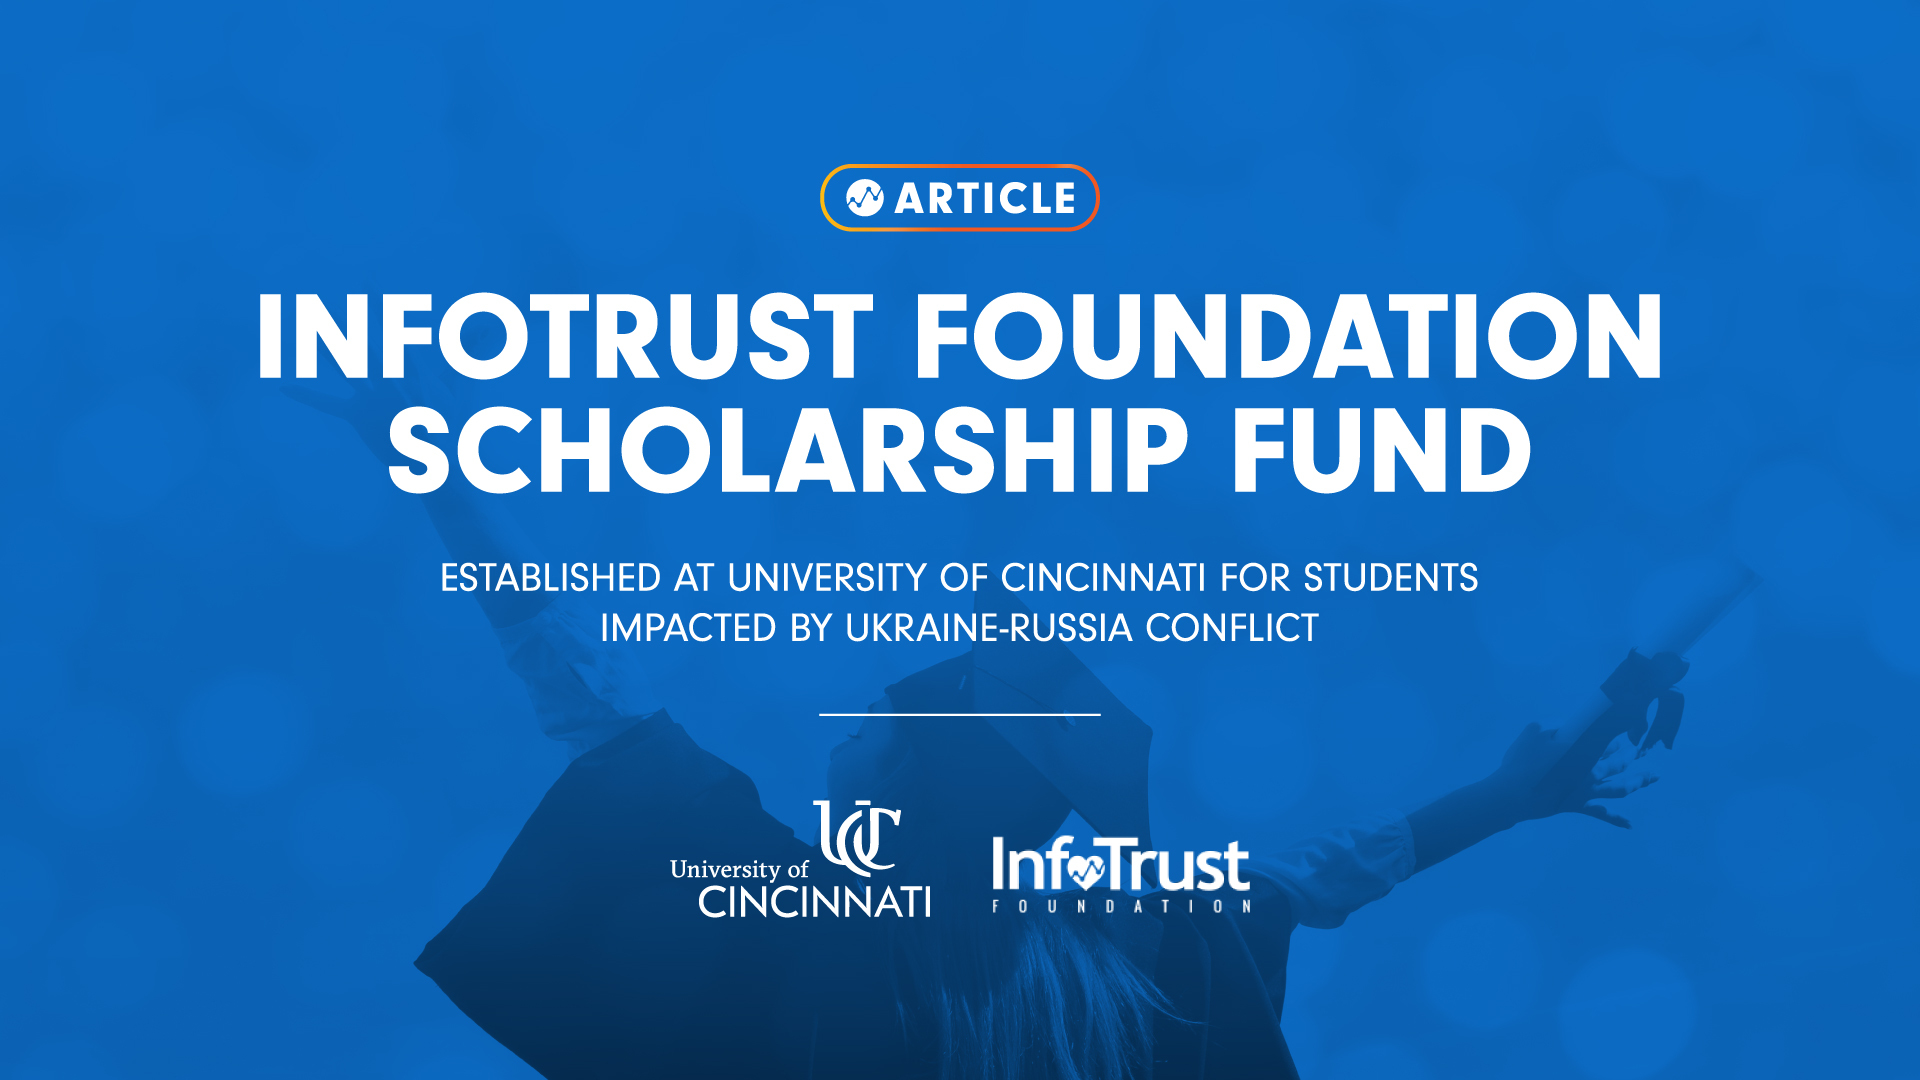 InfoTrust Foundation Scholarship Fund Established at University of Cincinnati for Students Impacted by Ukraine-Russia Conflict